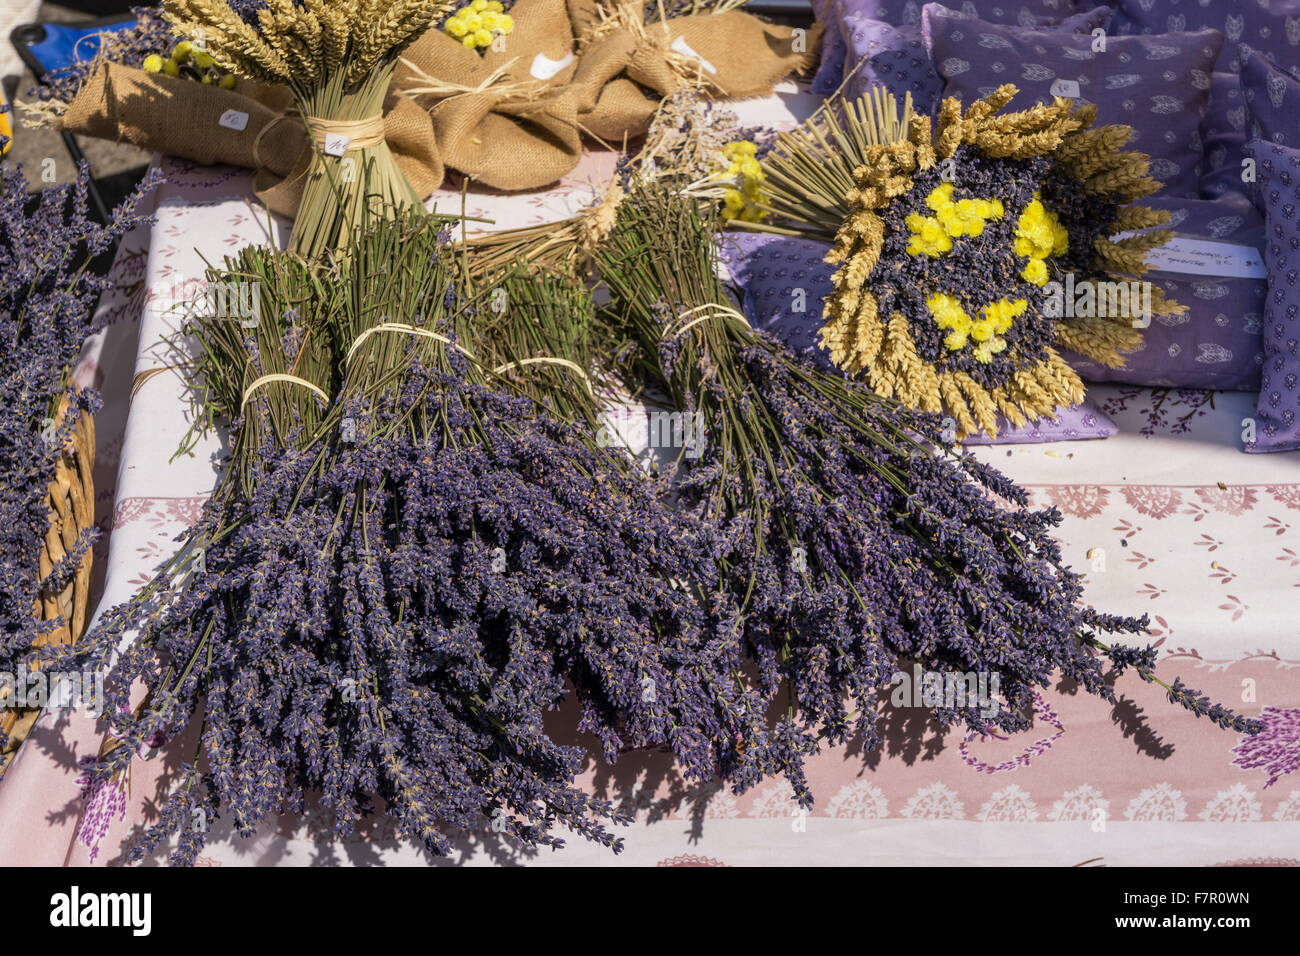 Lavender, bunch of flowers, Valensole, Provence Stock Photo